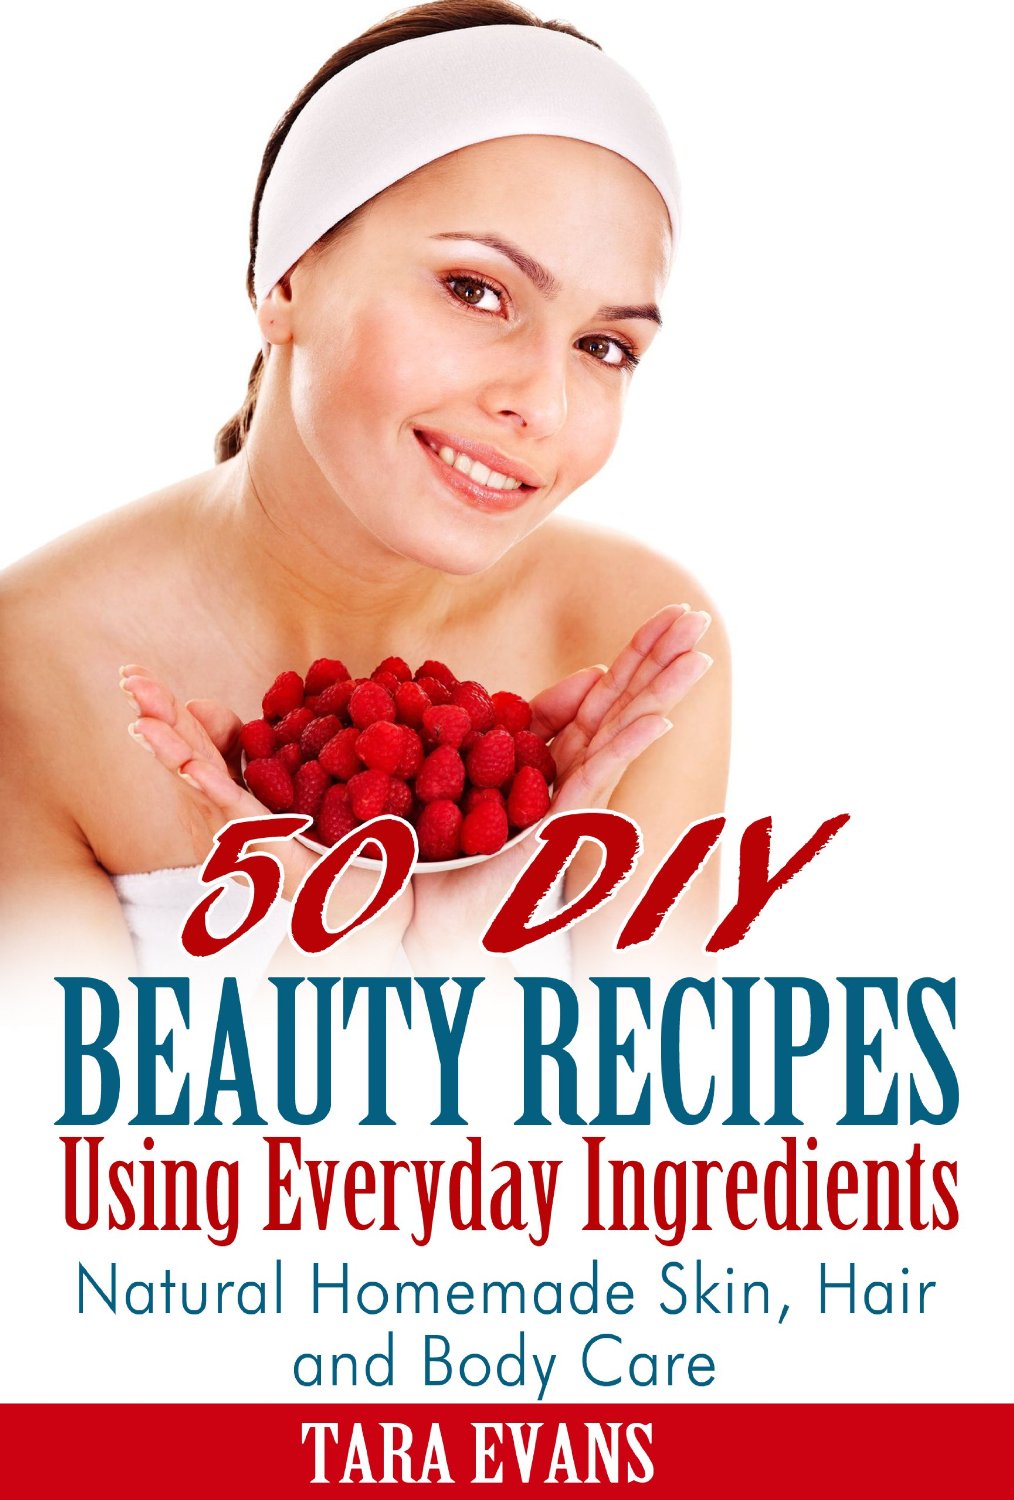 50 DIY Beauty Recipes Using Everyday Ingredients: Natural, Homemade Skin, Hair and Body Care by Tara Evans